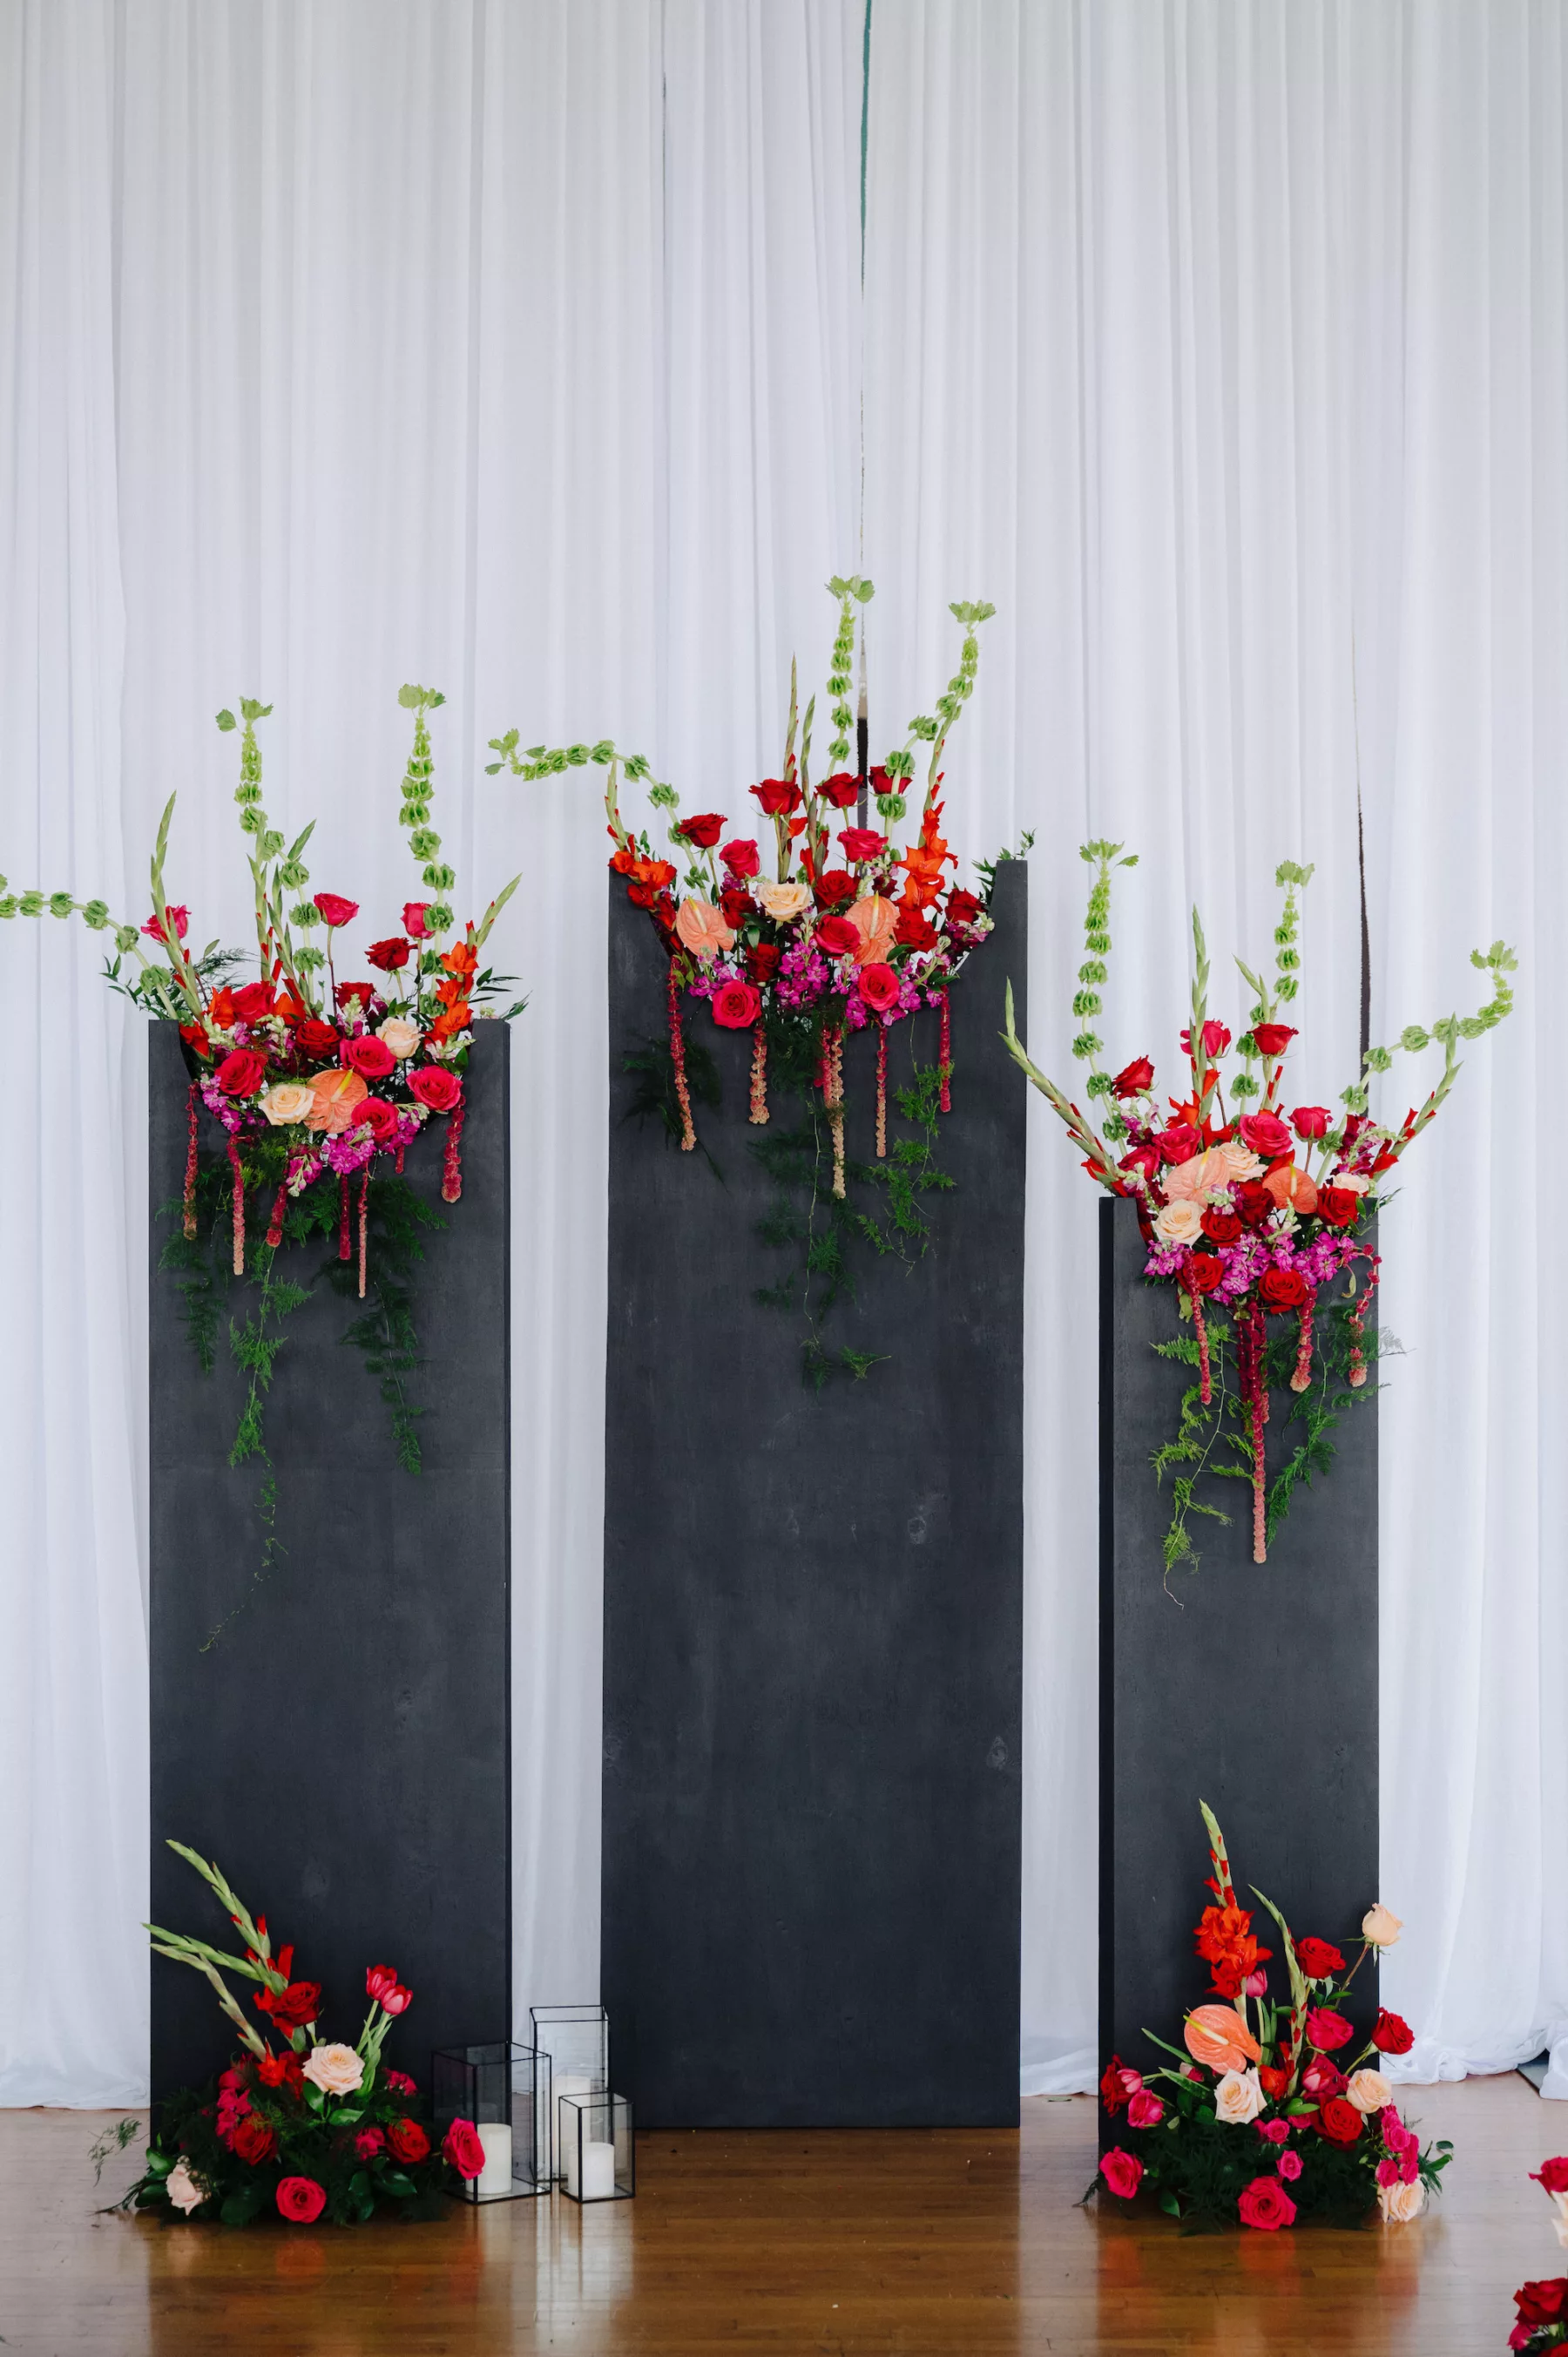 Modern Black and Pink Italian Inspired Spring Wedding Ceremony Ideas | Unique Black Altar Backdrop with Bold Pink and Red Roses, Orange Anthurium and Greenery | Tampa Bay Florist Save The Date Florida